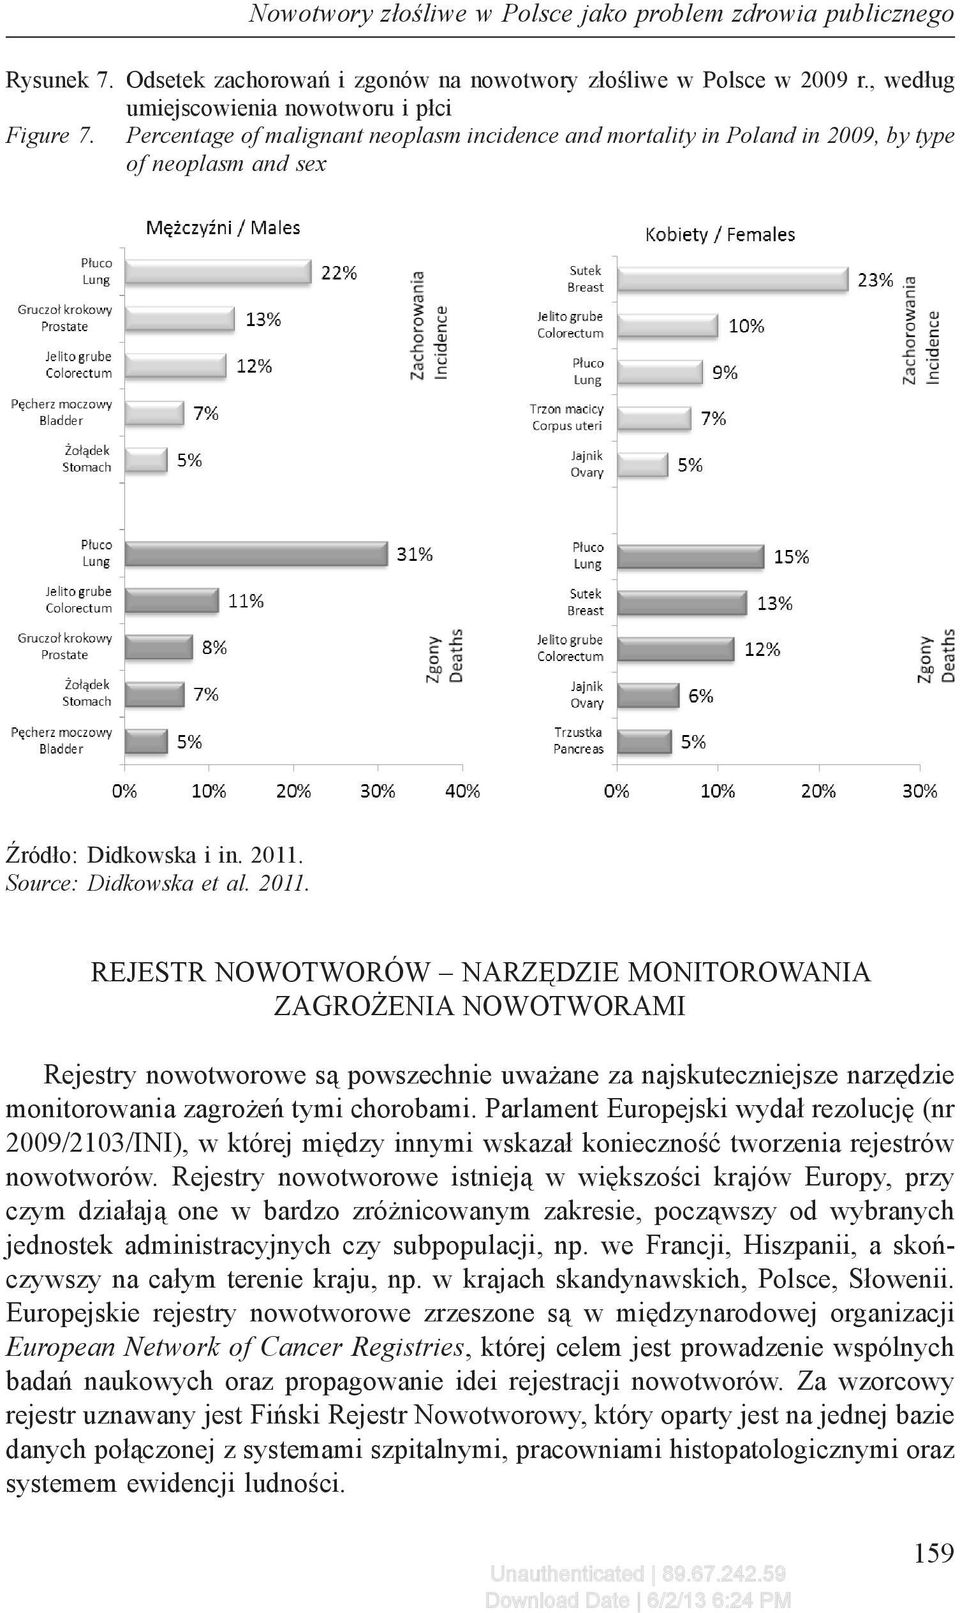 7. Percentage Percentage of of malignant malignant neoplasm incidence incidence and and mortality mortality in Poland in Poland in 2009, in 2009, by type of neoplasm and sex by type of neoplasm and